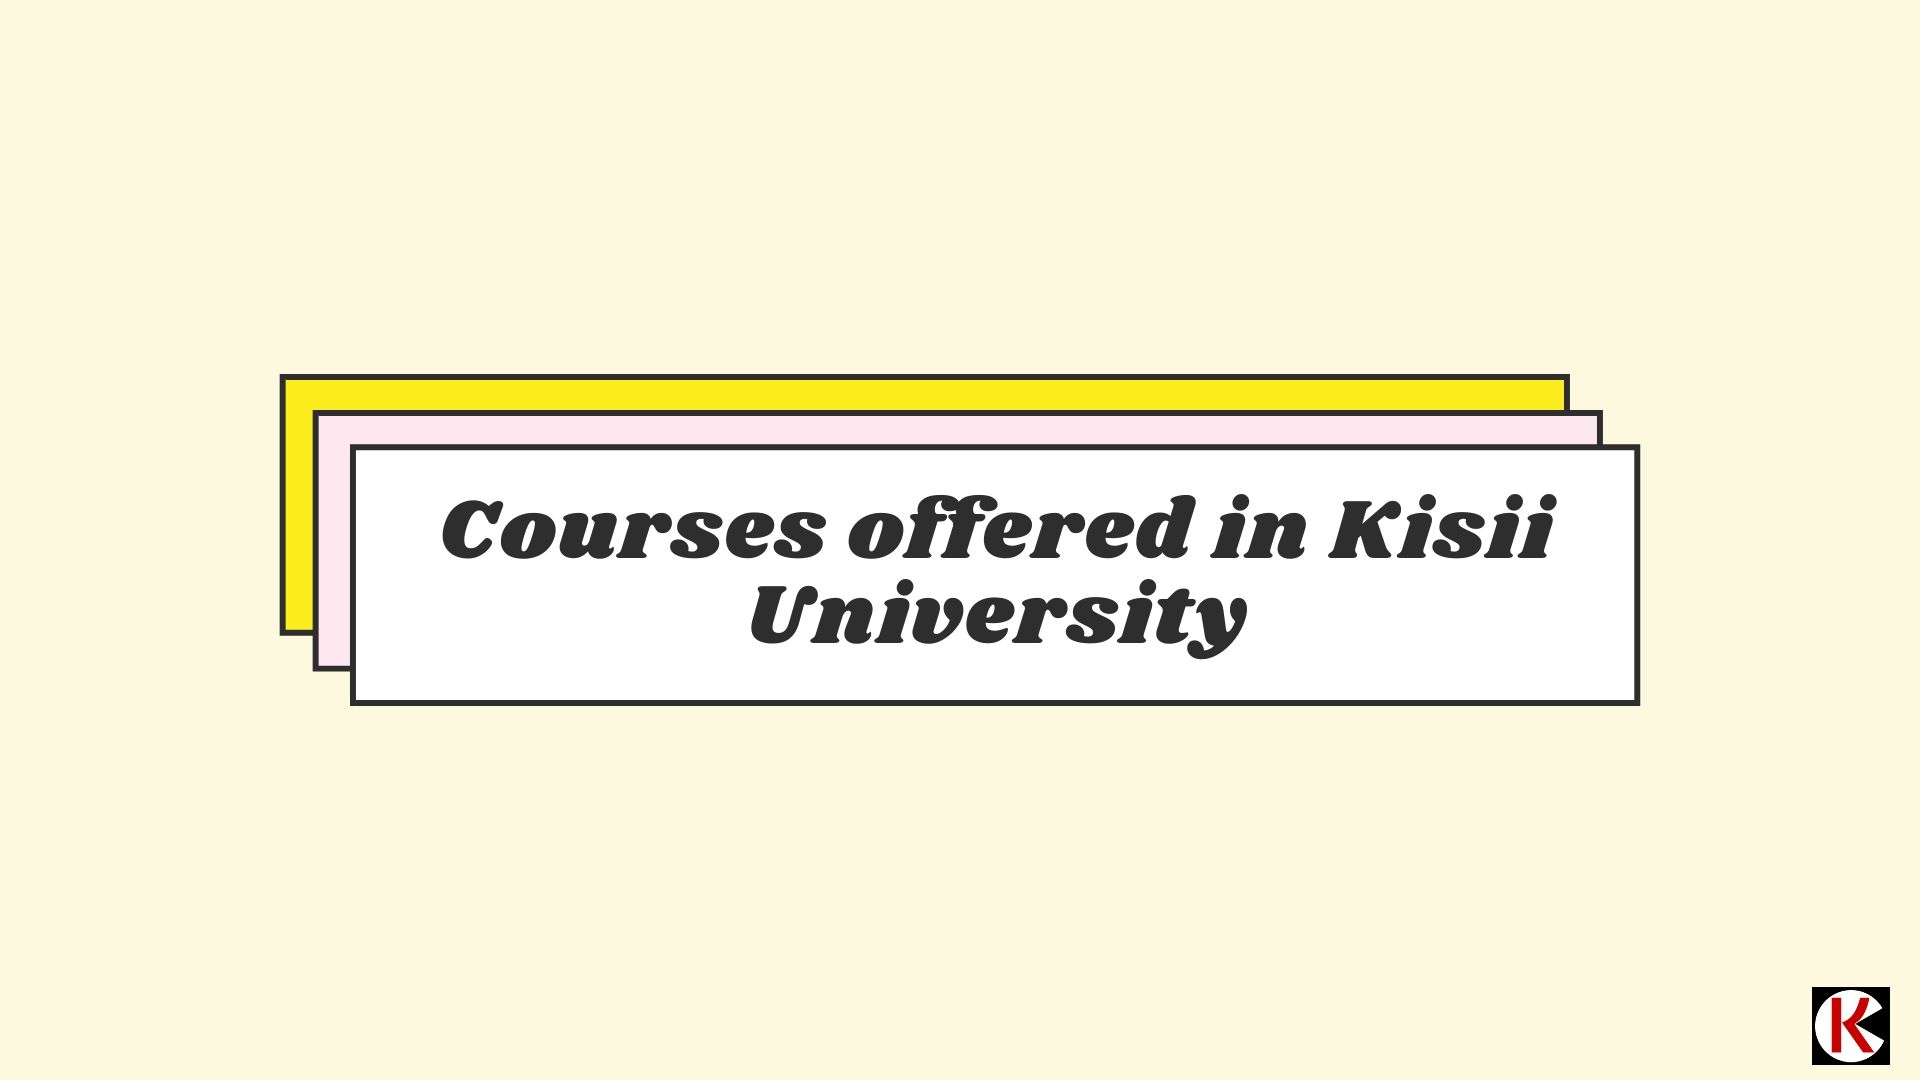 Courses offered in Kisii University